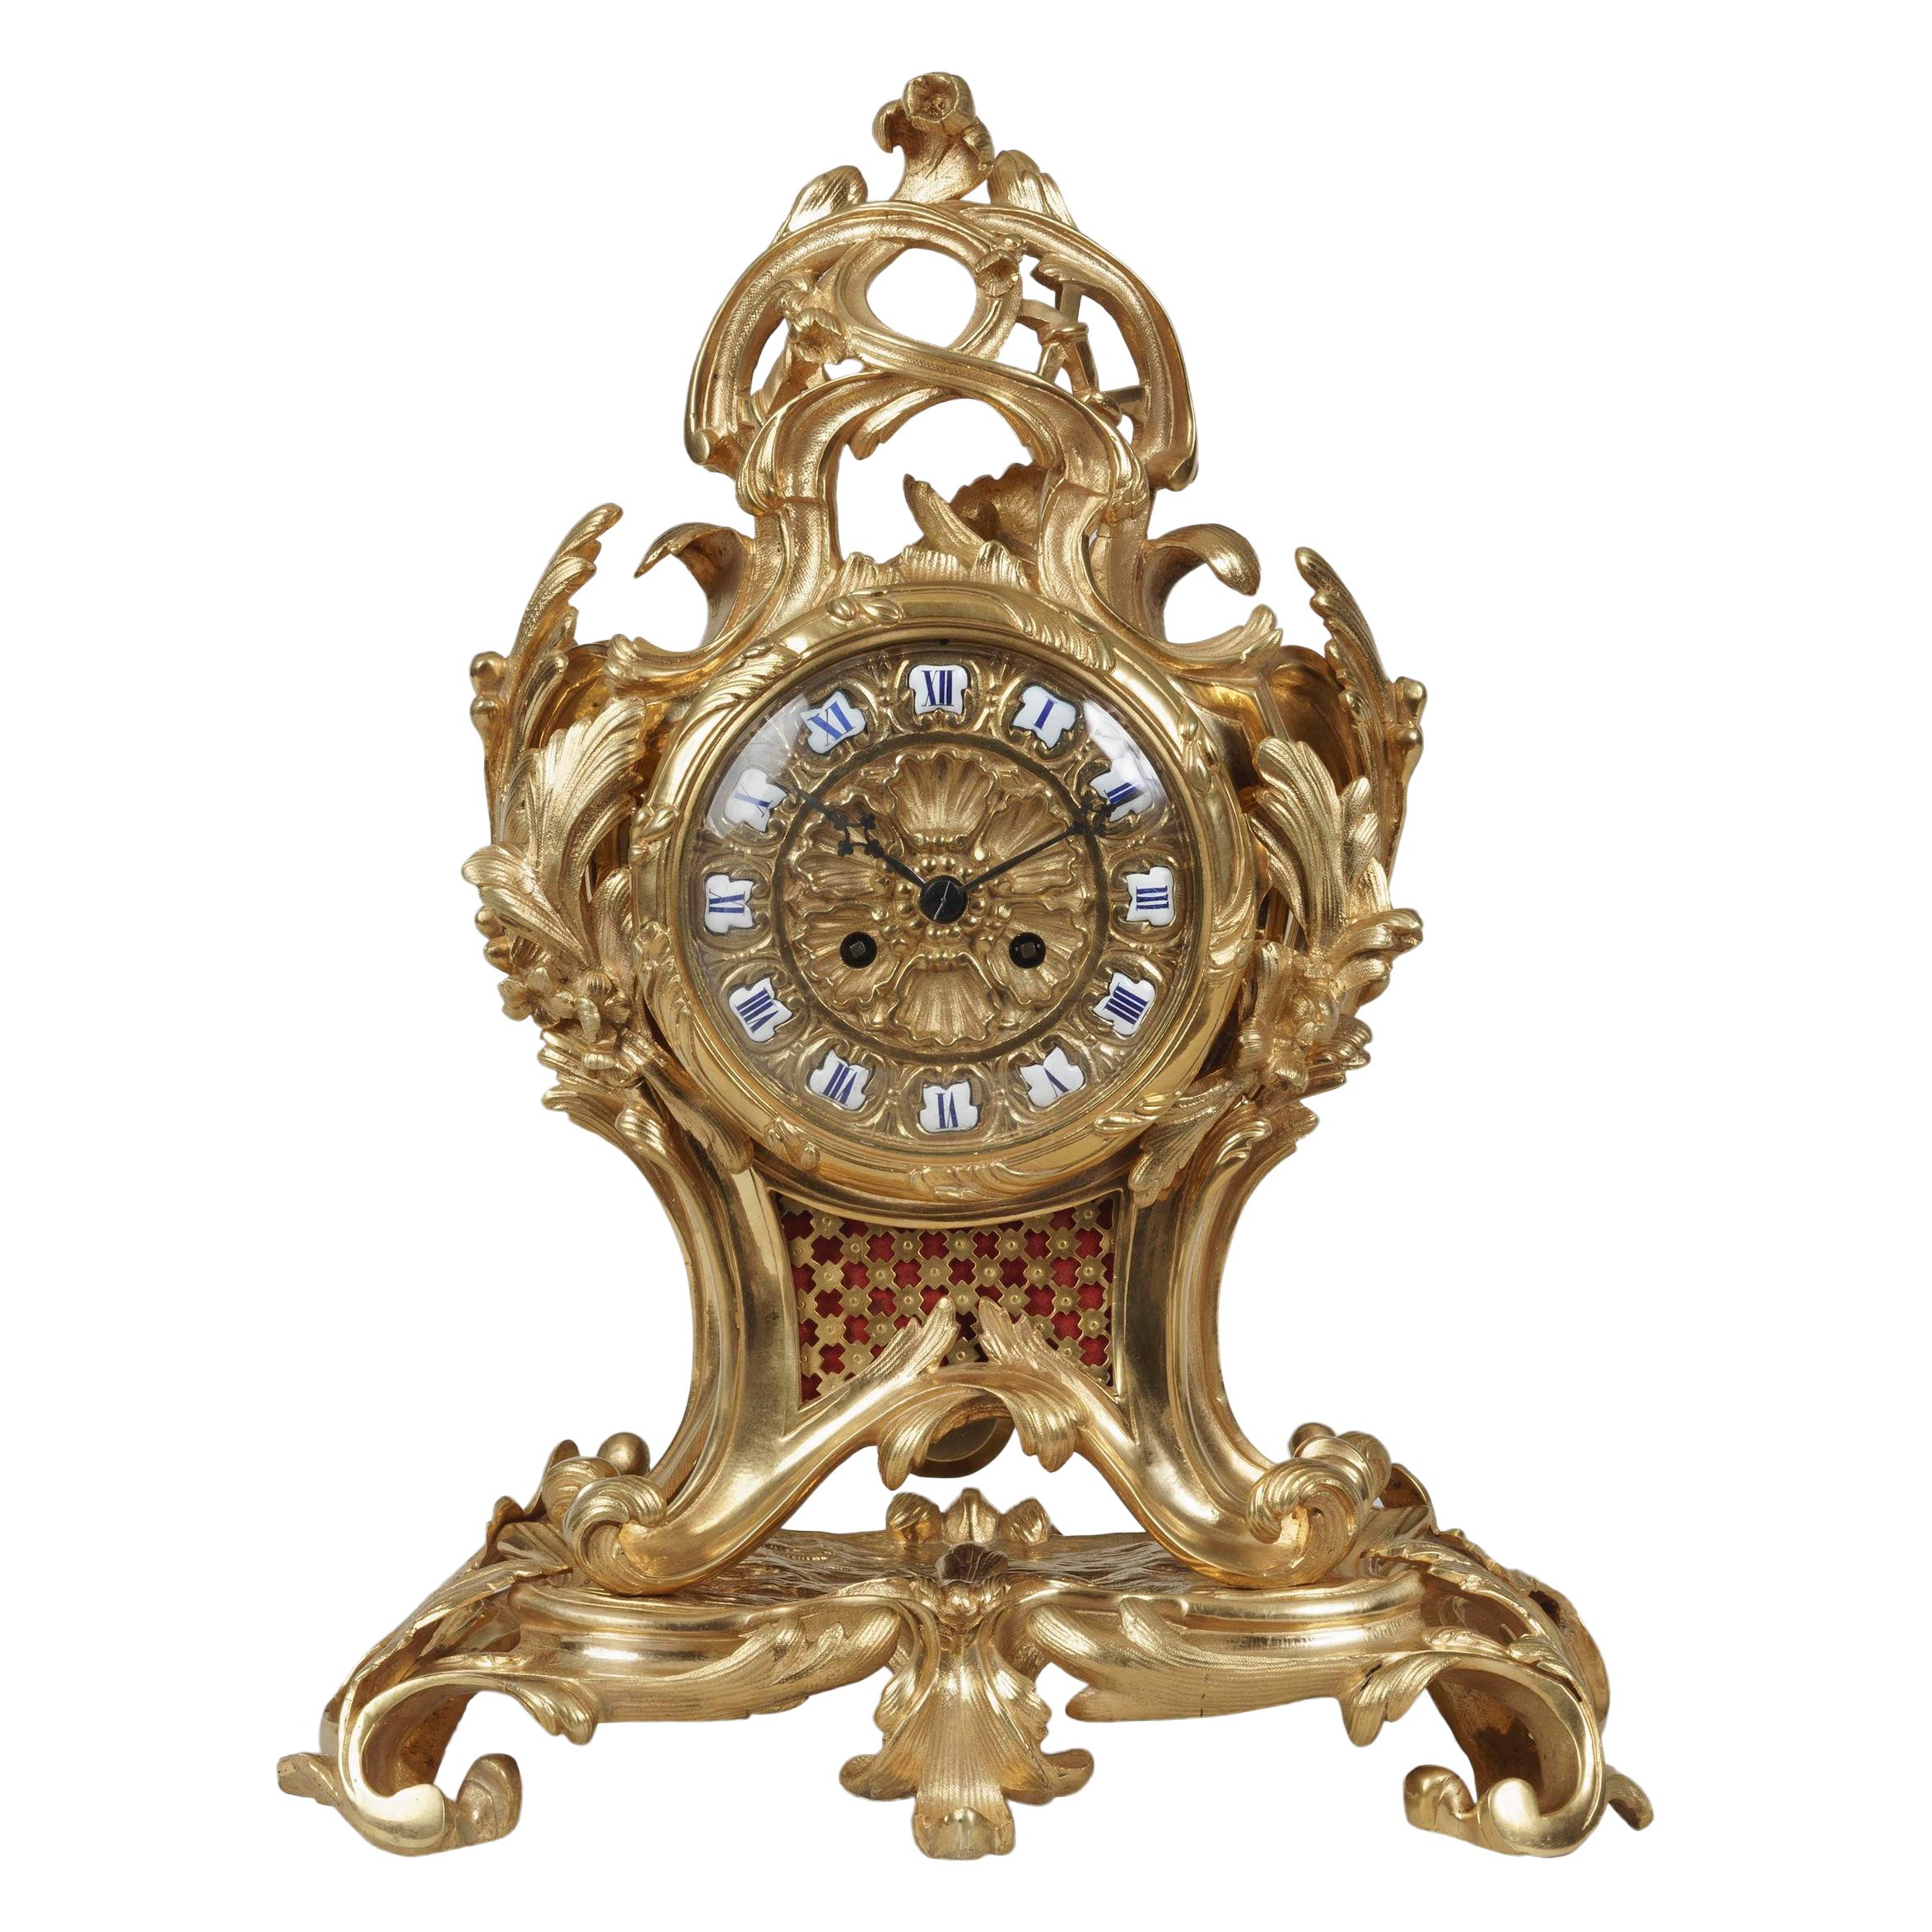 19th Century French Ormolu Mantle Clock in the Louis XV Rococo Style